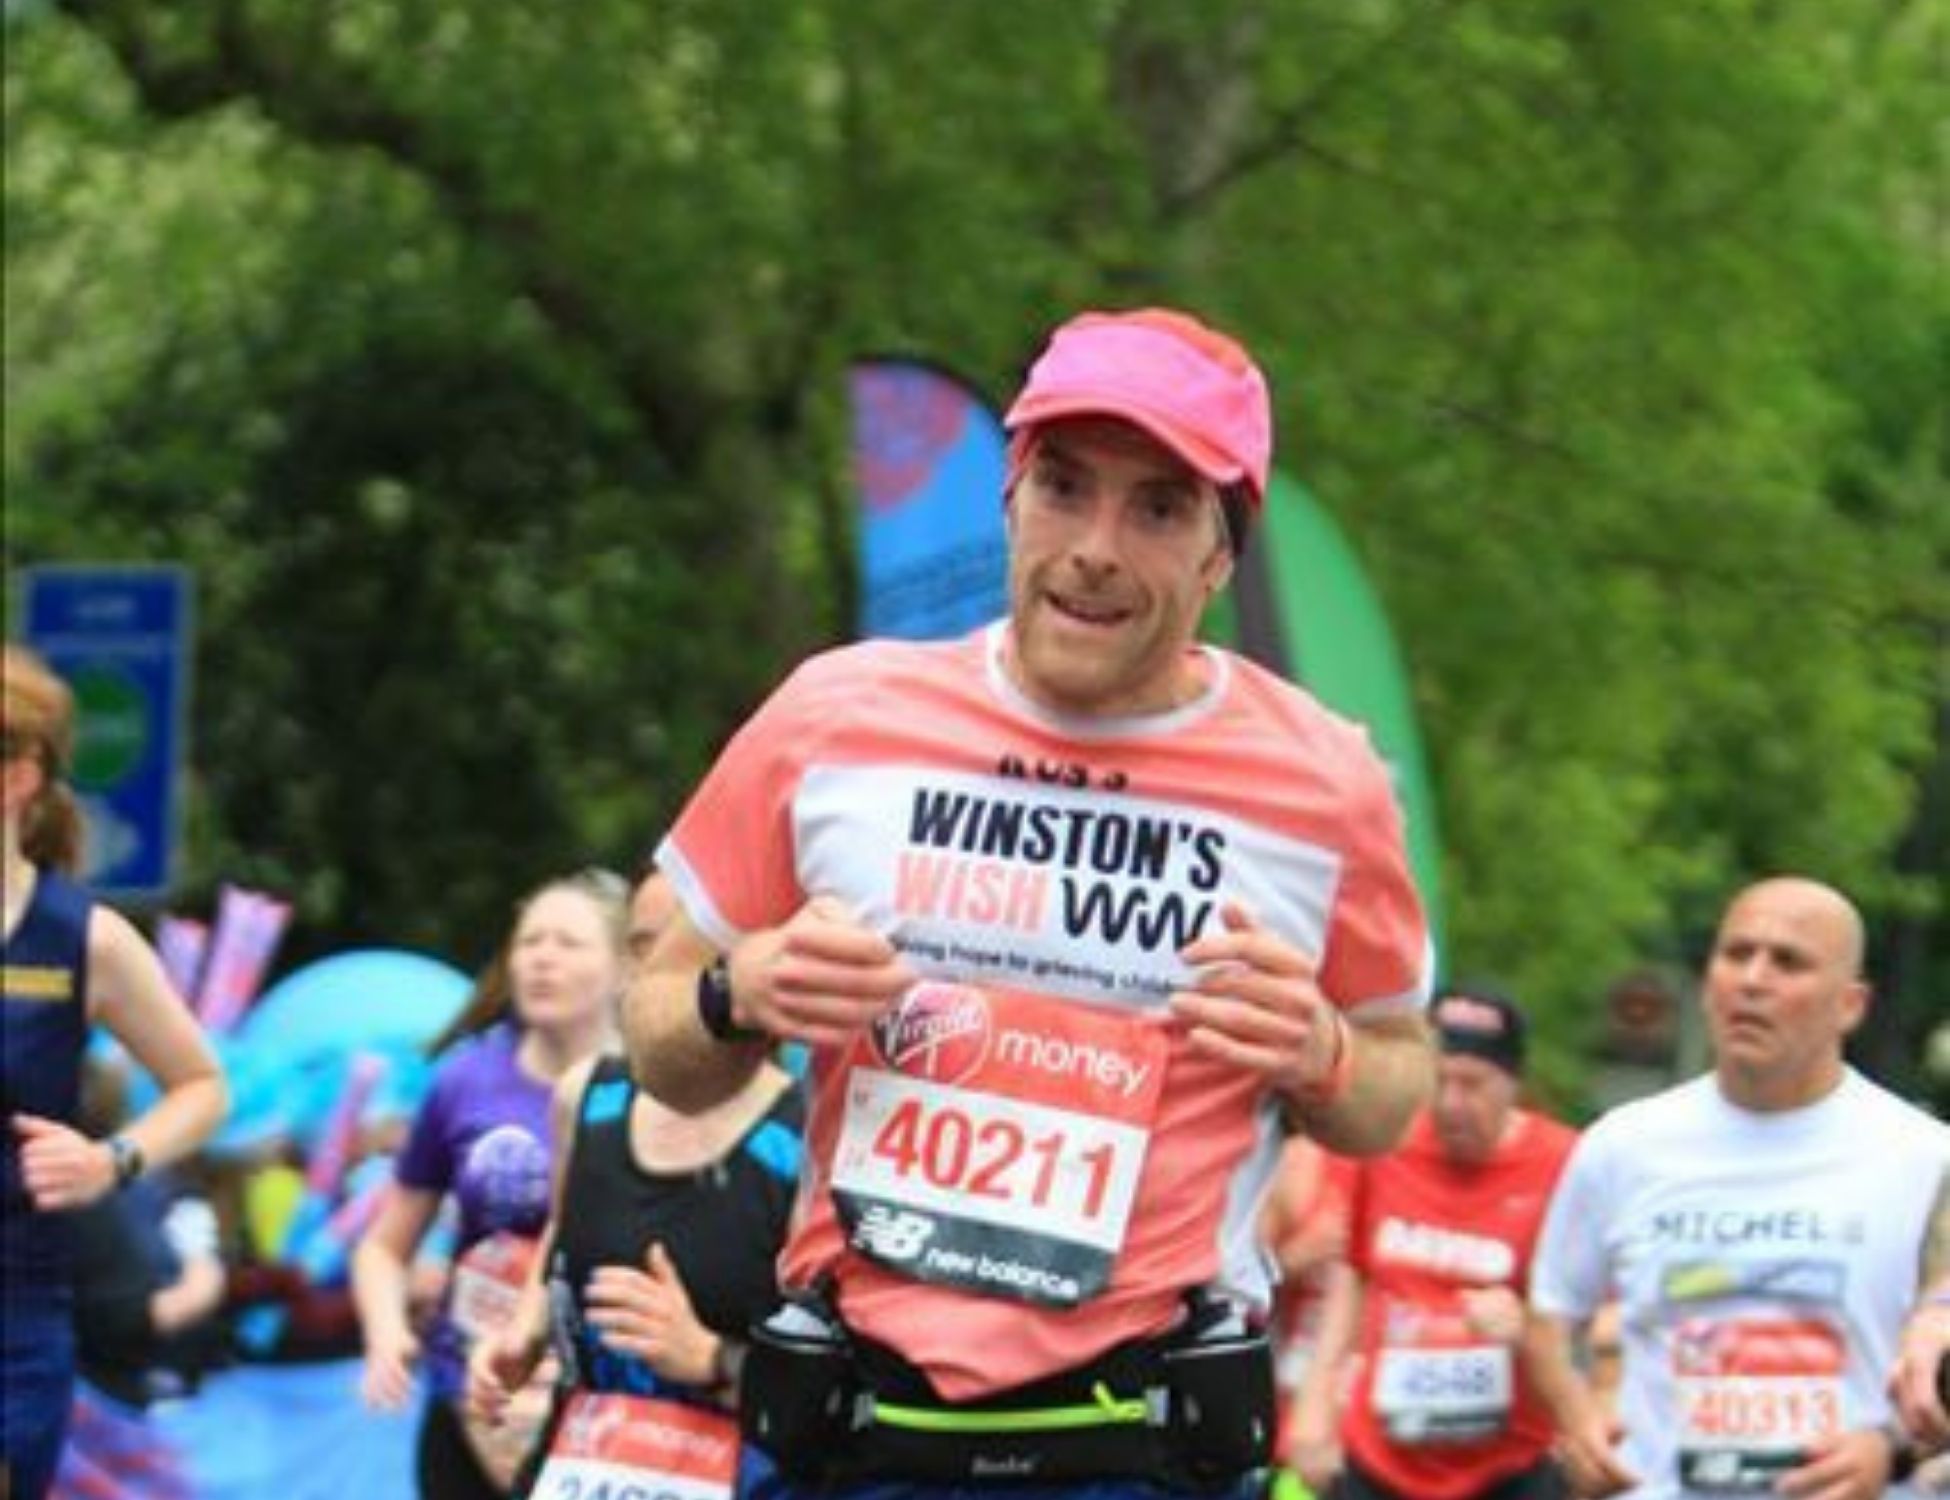 South West running events for Winston's Wish